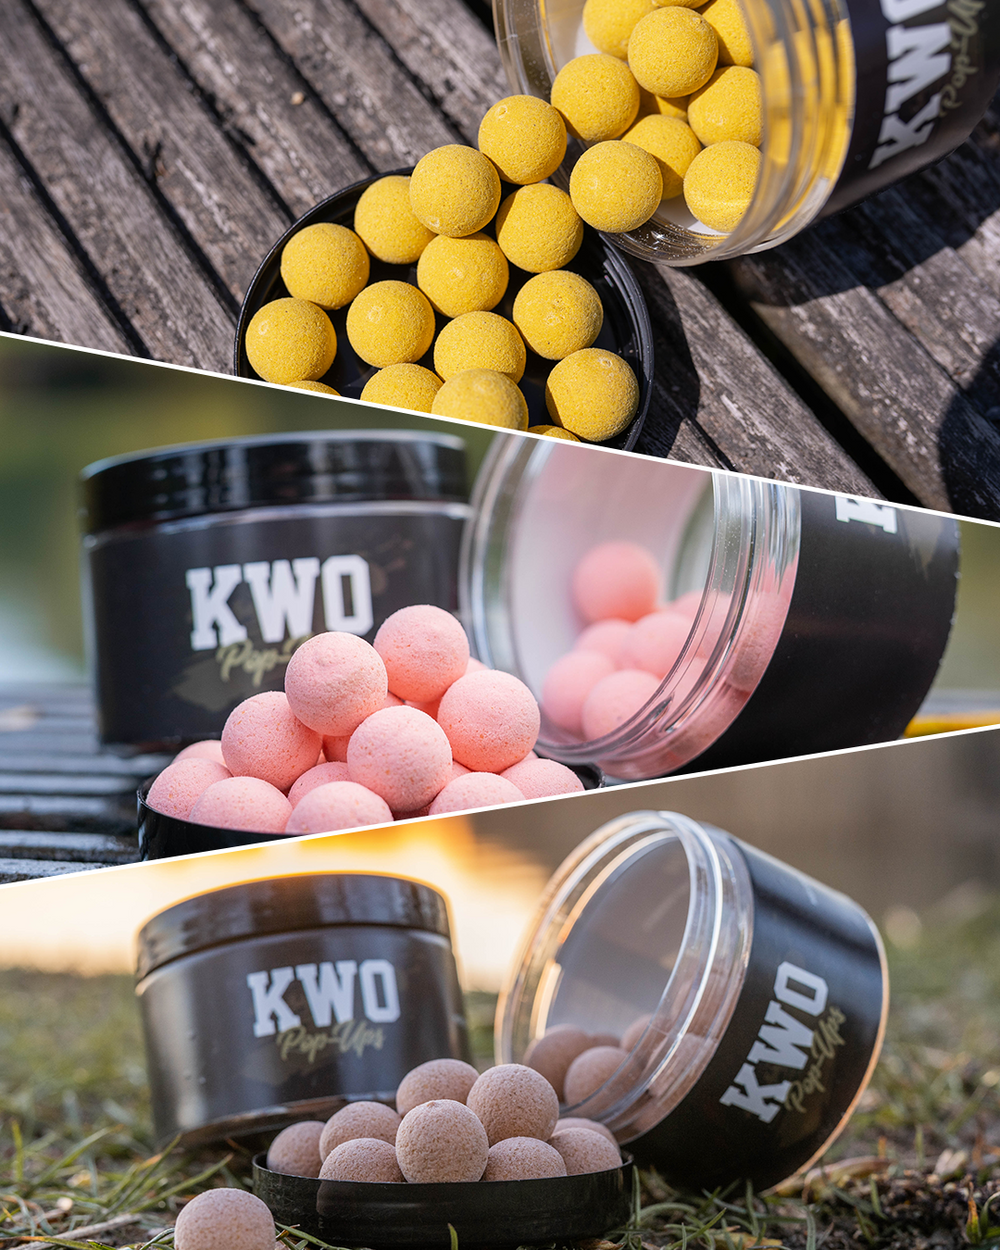 Pop-Up Deal - KWO Specials - Boilies - KWO Shop